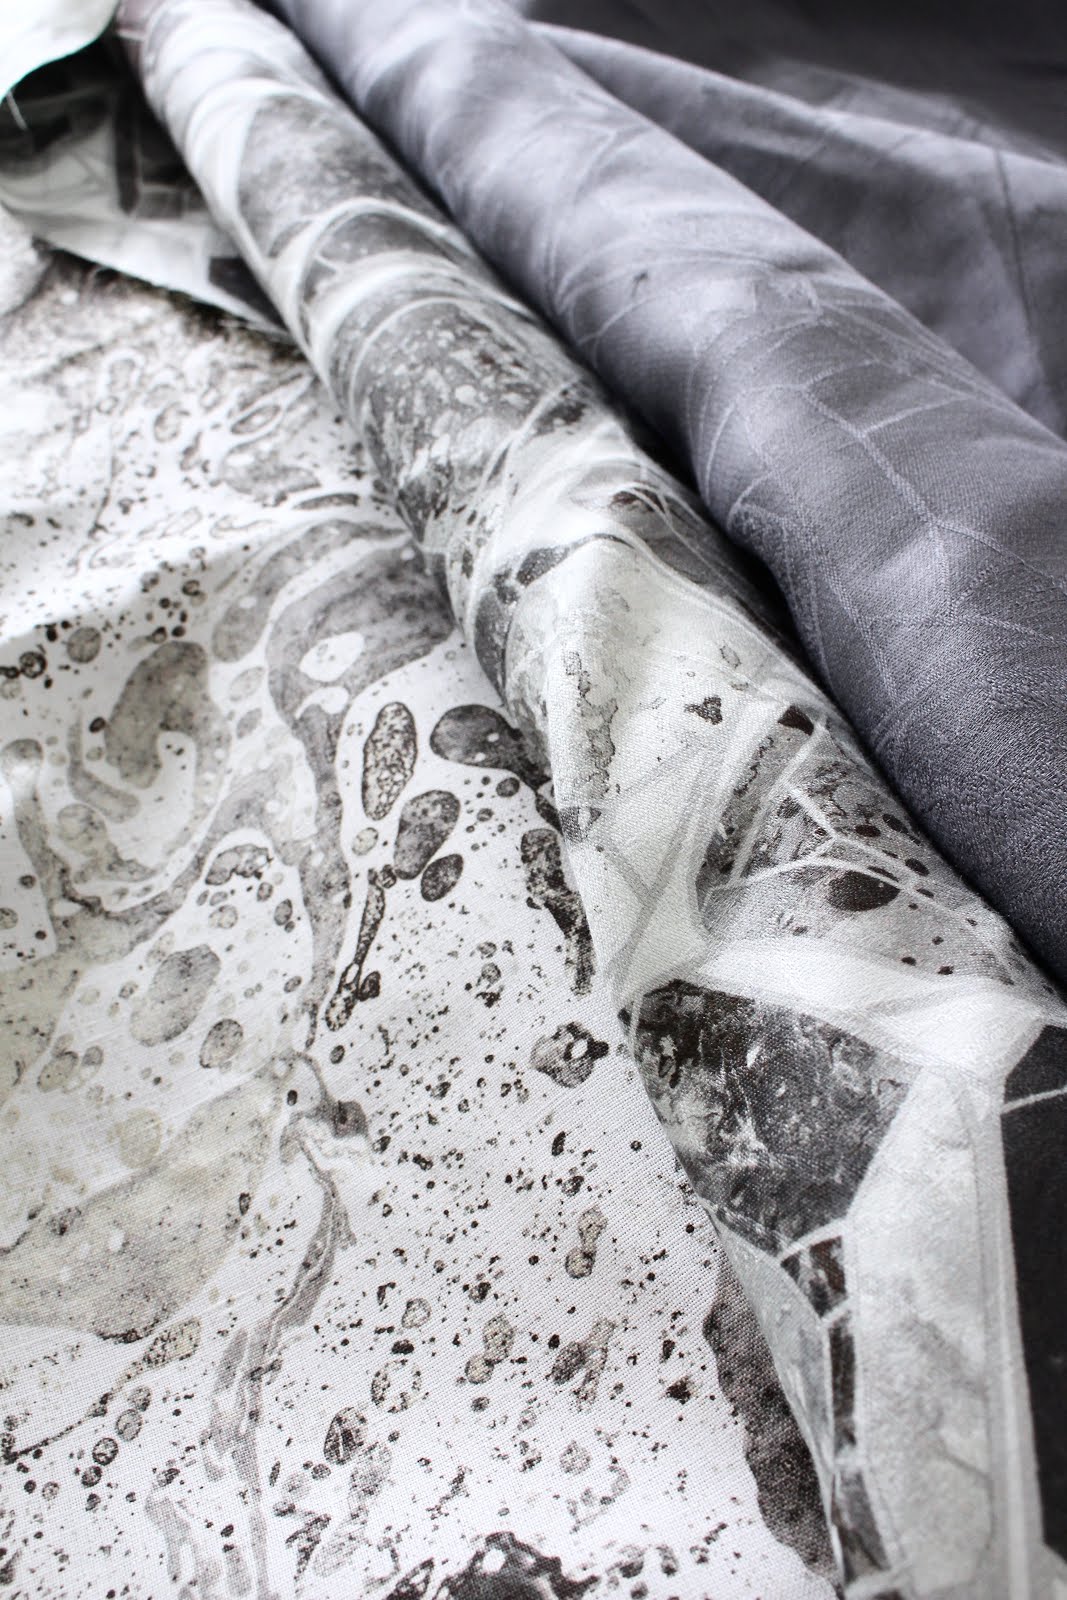 La Maison Jolie: Earthed Fabrics - Inspired By Nature!